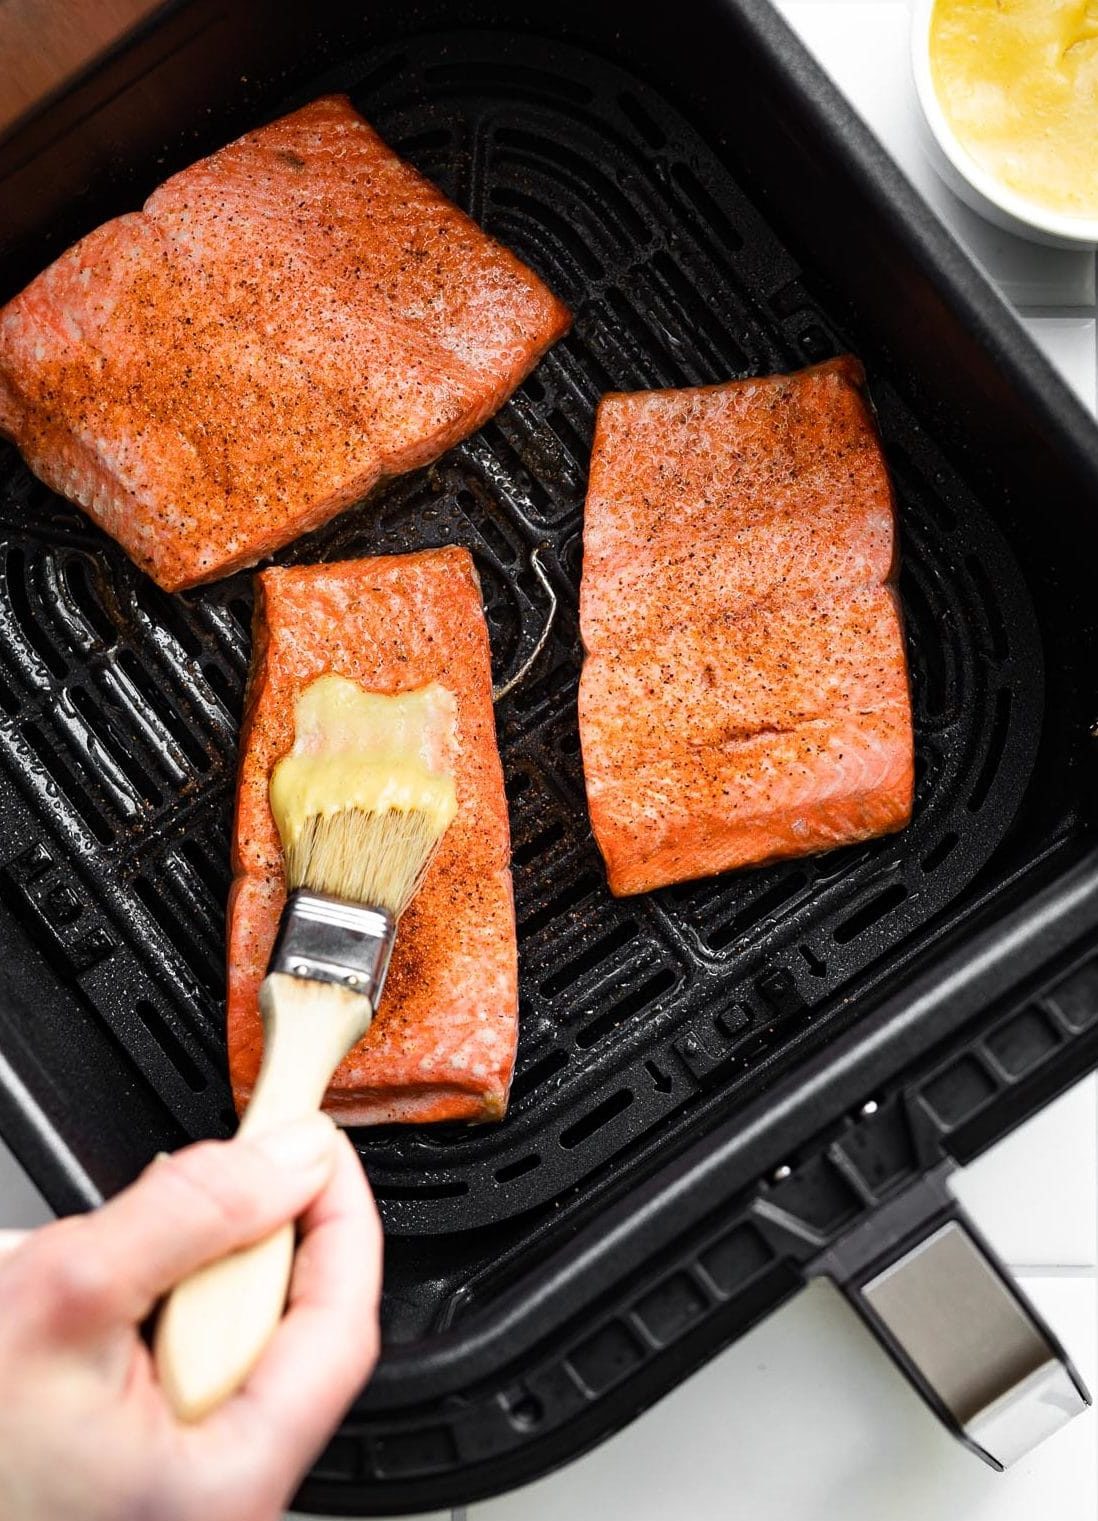 3 pieces of seasoned salmon in the basket of an air fryer with a small white bowl full of creamy mustard sauce on the side and a woman's hand holding a brush spreading the mustard sauce on top of one of the salmon filets